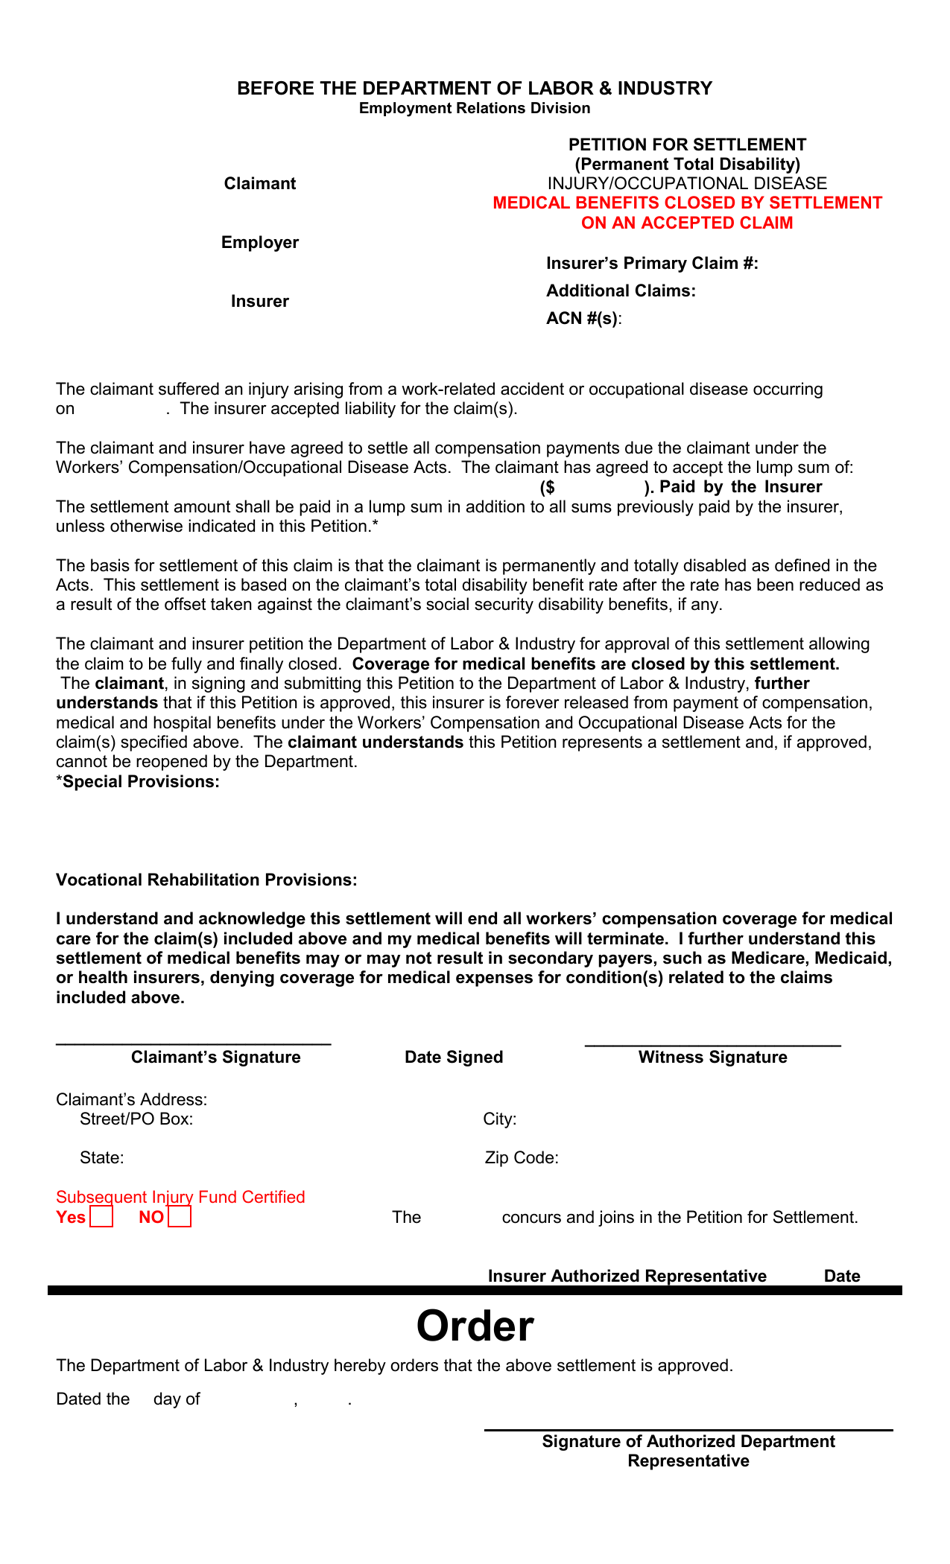 Petition for Settlement - Ptd, Injury / Od Medical Closed on an Accepted Claim - Montana, Page 1